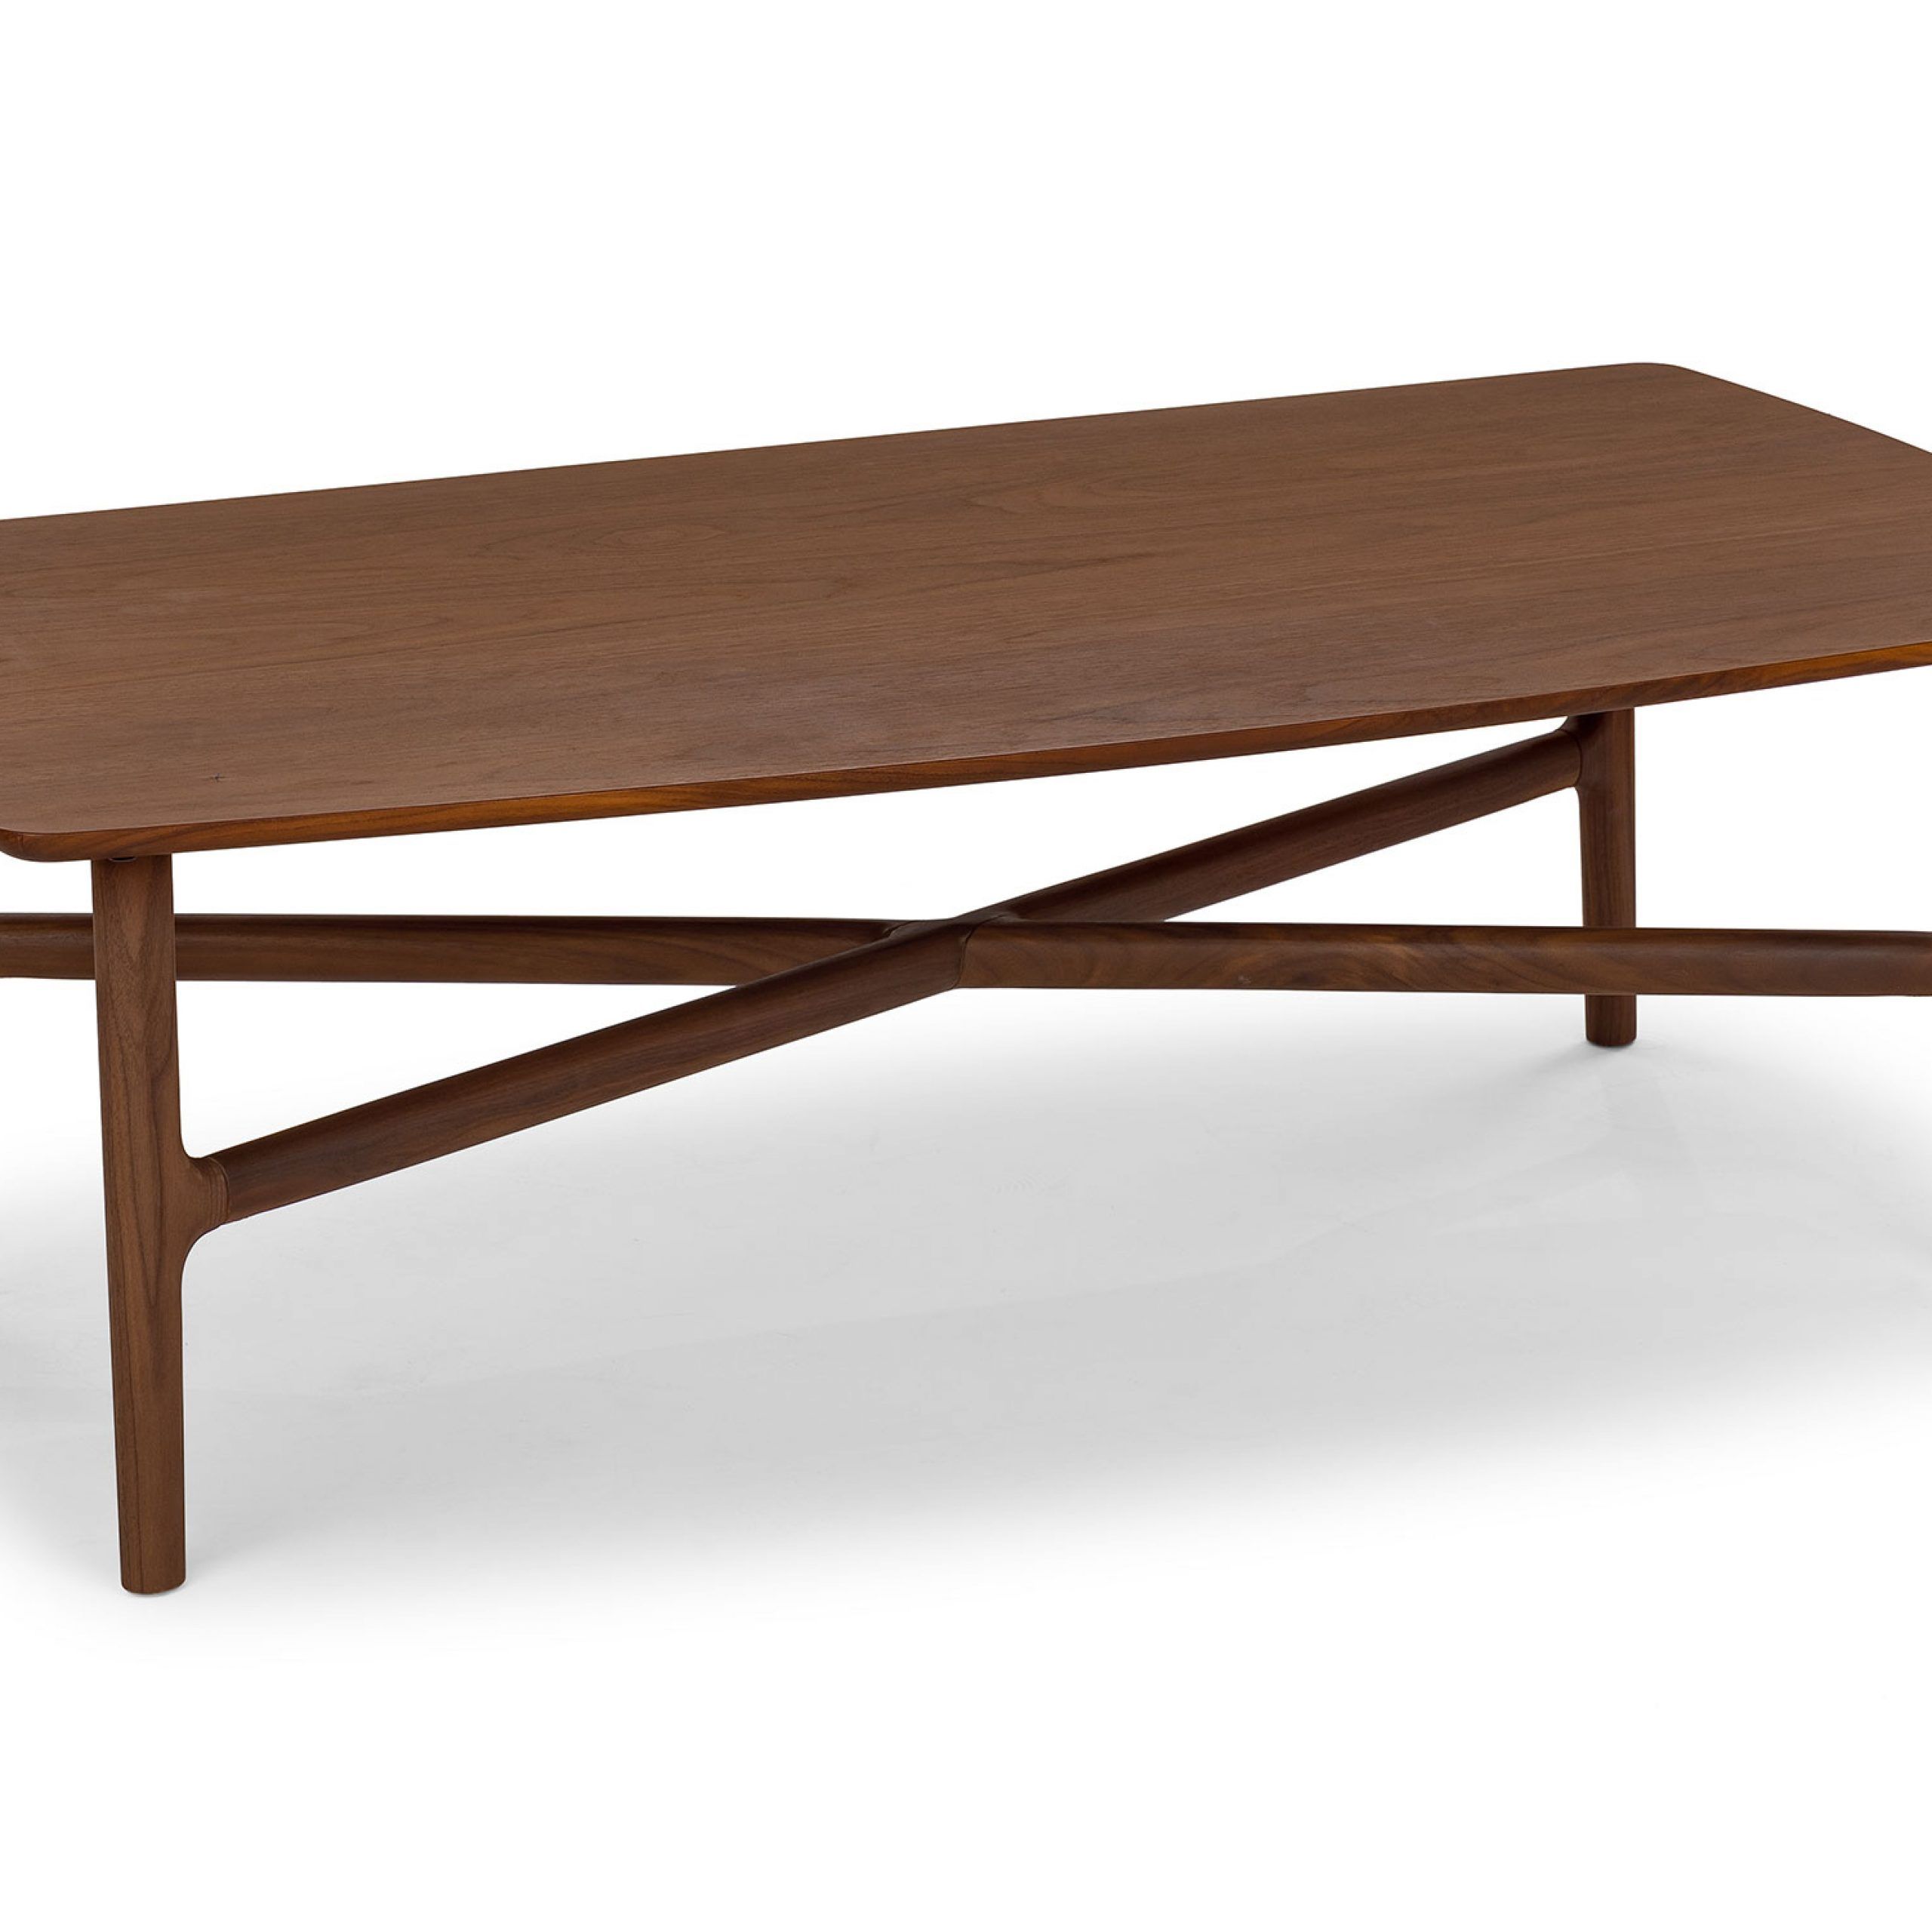 Brezza Matte Walnut Rectangular Coffee Table | Article Intended For Matte Coffee Tables (View 9 of 15)